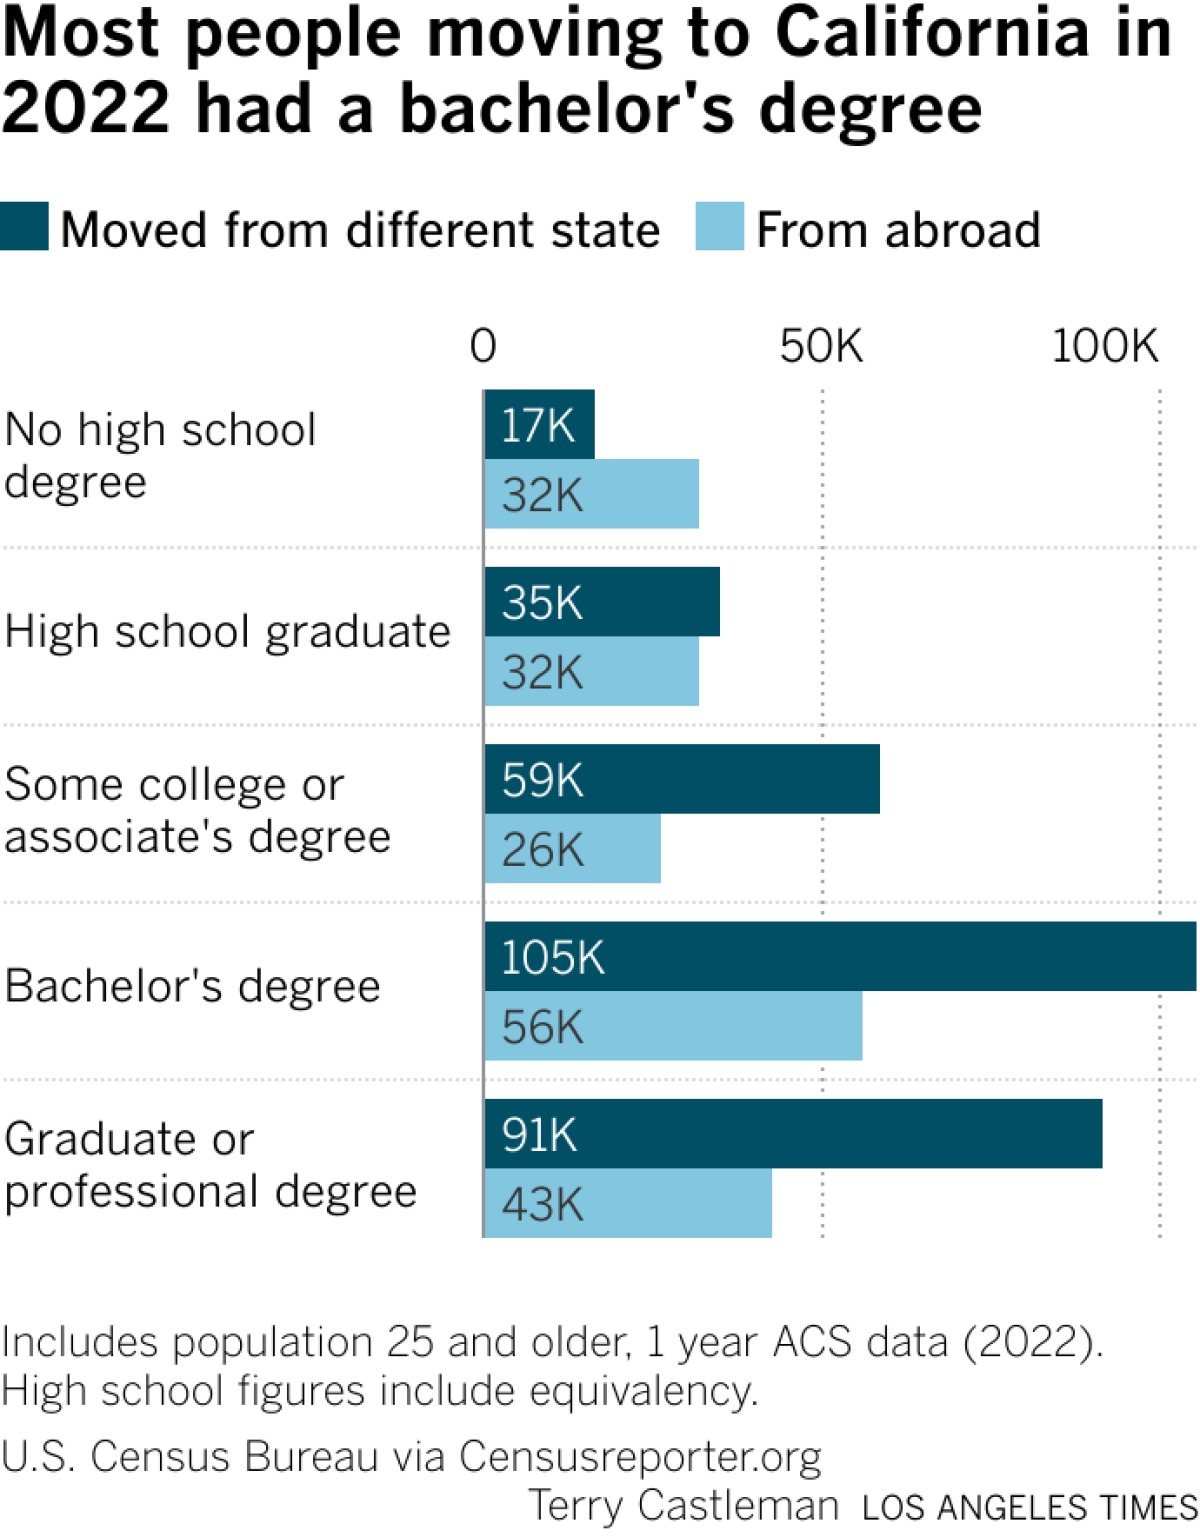 Chart showing that most people who moved to California in 2022 had a bachelor's degree or more education.